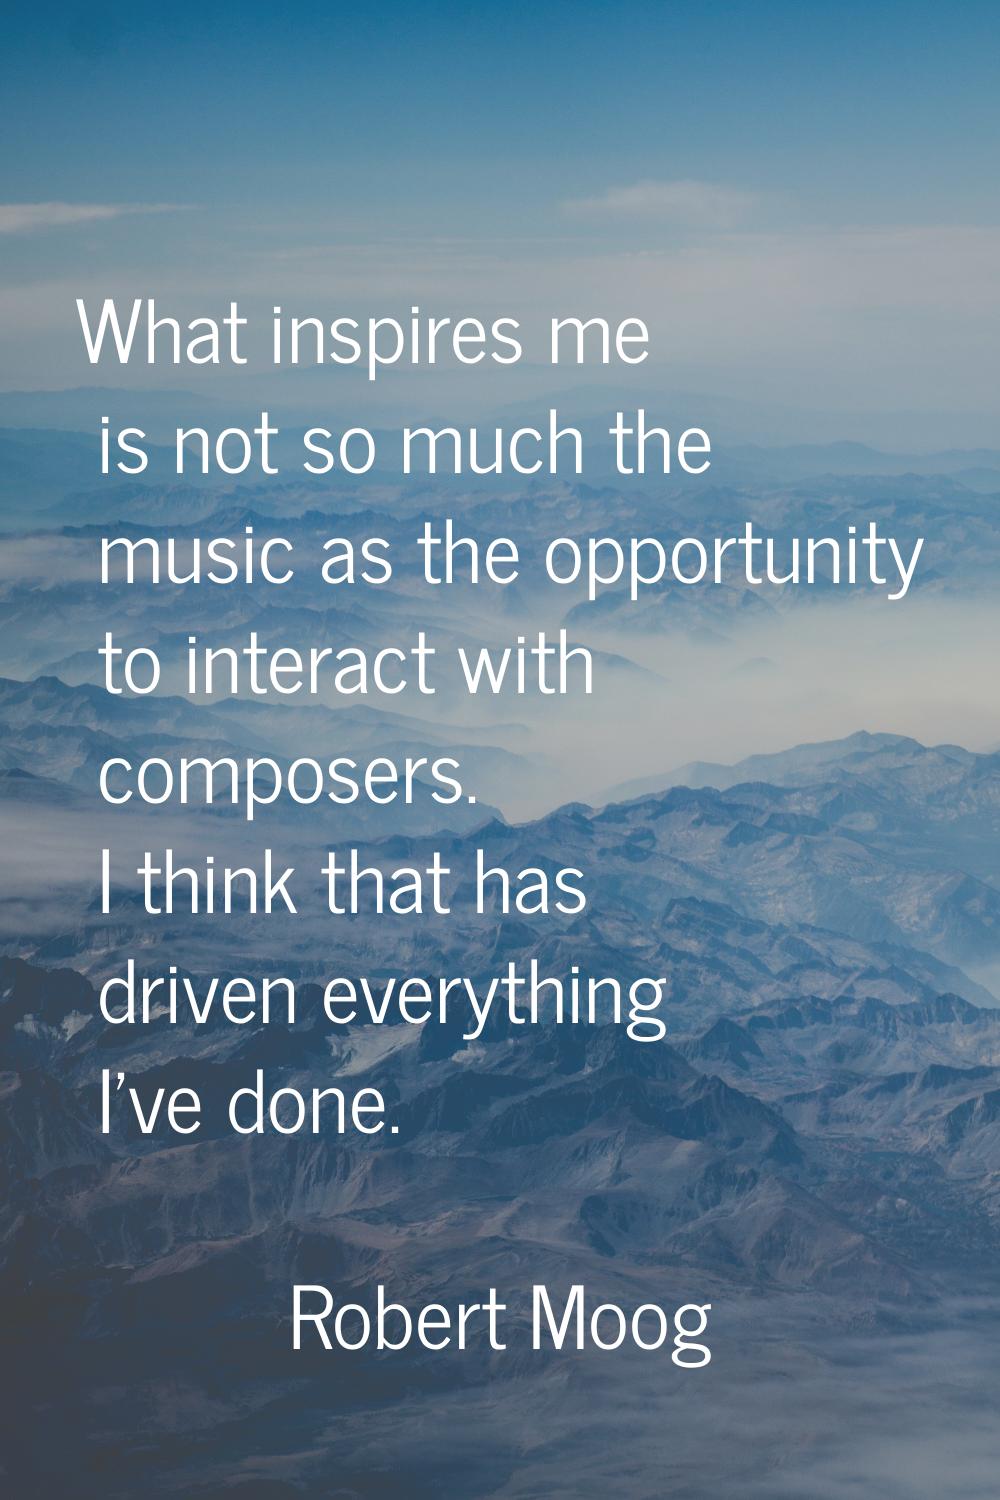 What inspires me is not so much the music as the opportunity to interact with composers. I think th